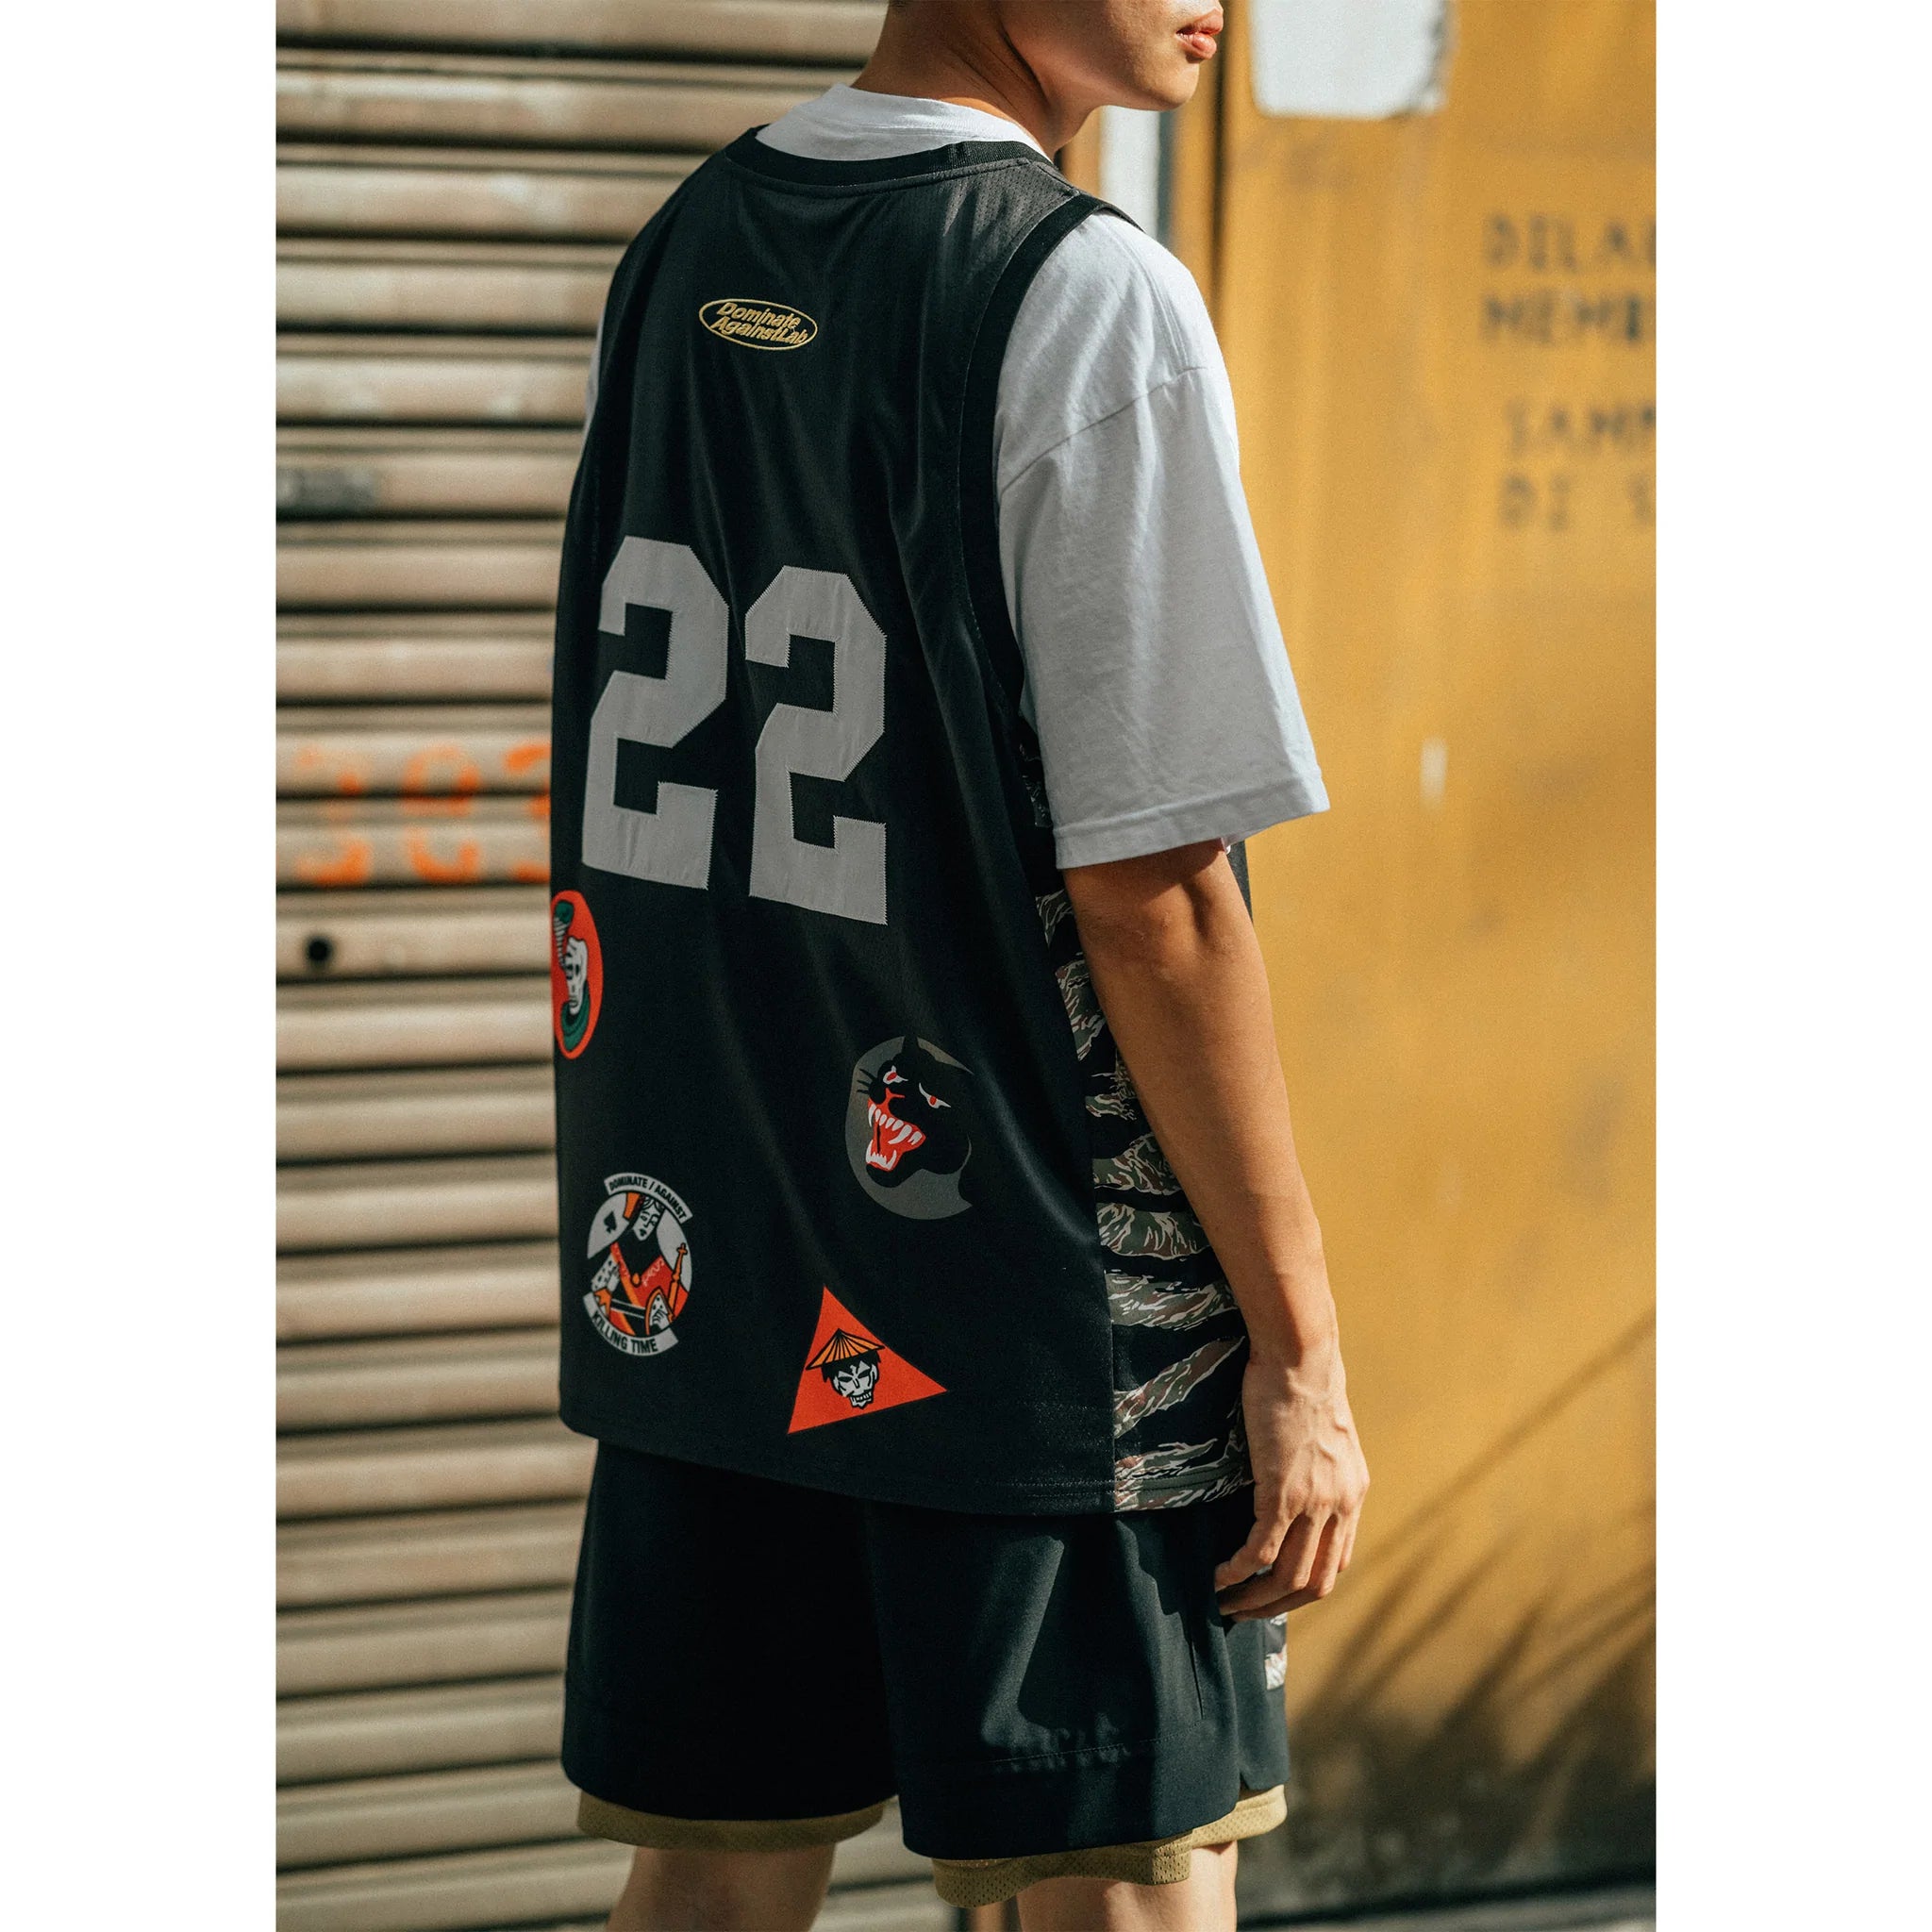 Against Lab x Dominate Patch Mesh Jersey Black !